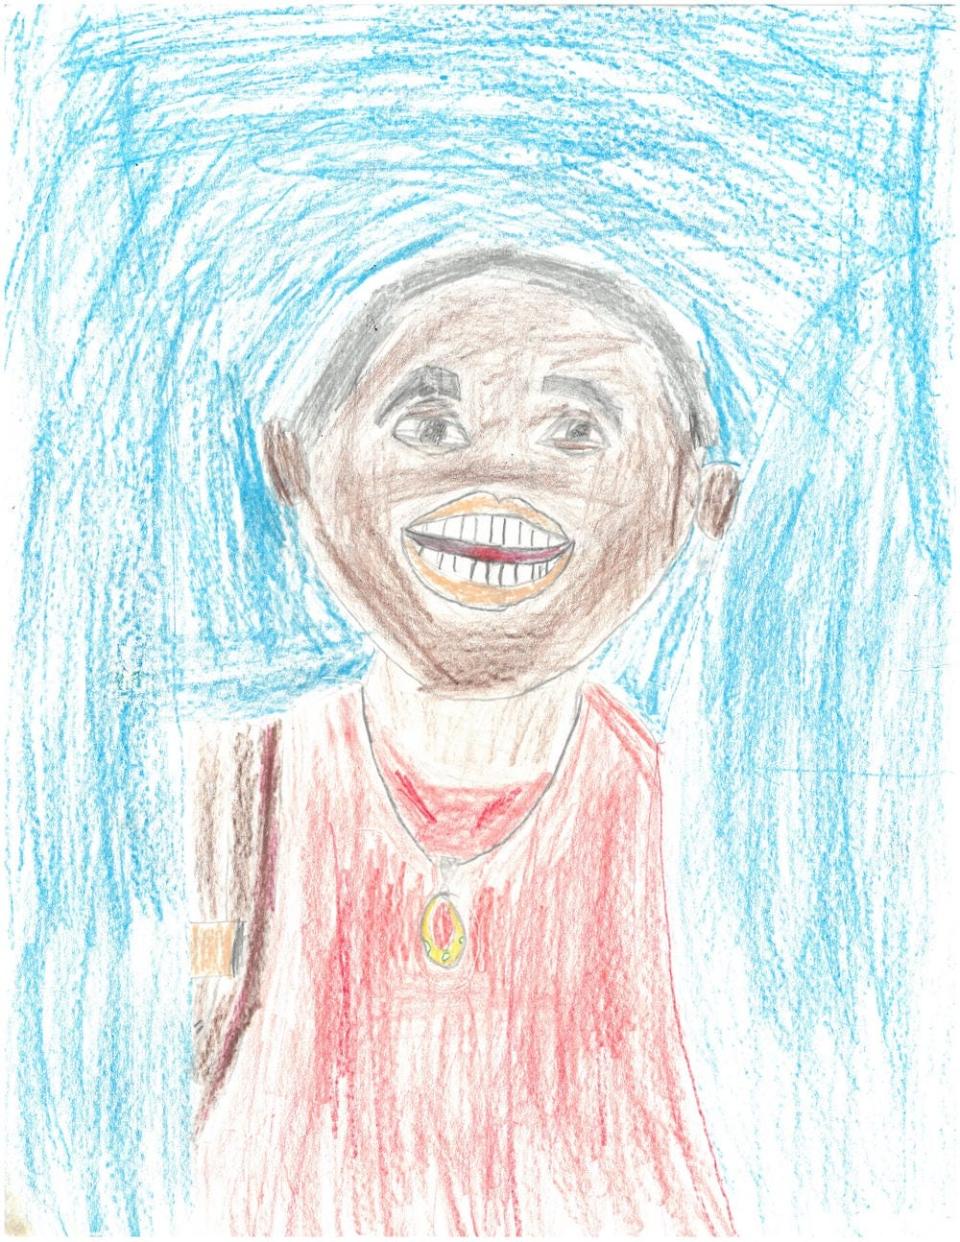 This was the third-place winner in the USCellular's Black History Month Art Contest for the Boys and Girls Club of Henderson County. This art was done by Jose, age 11.